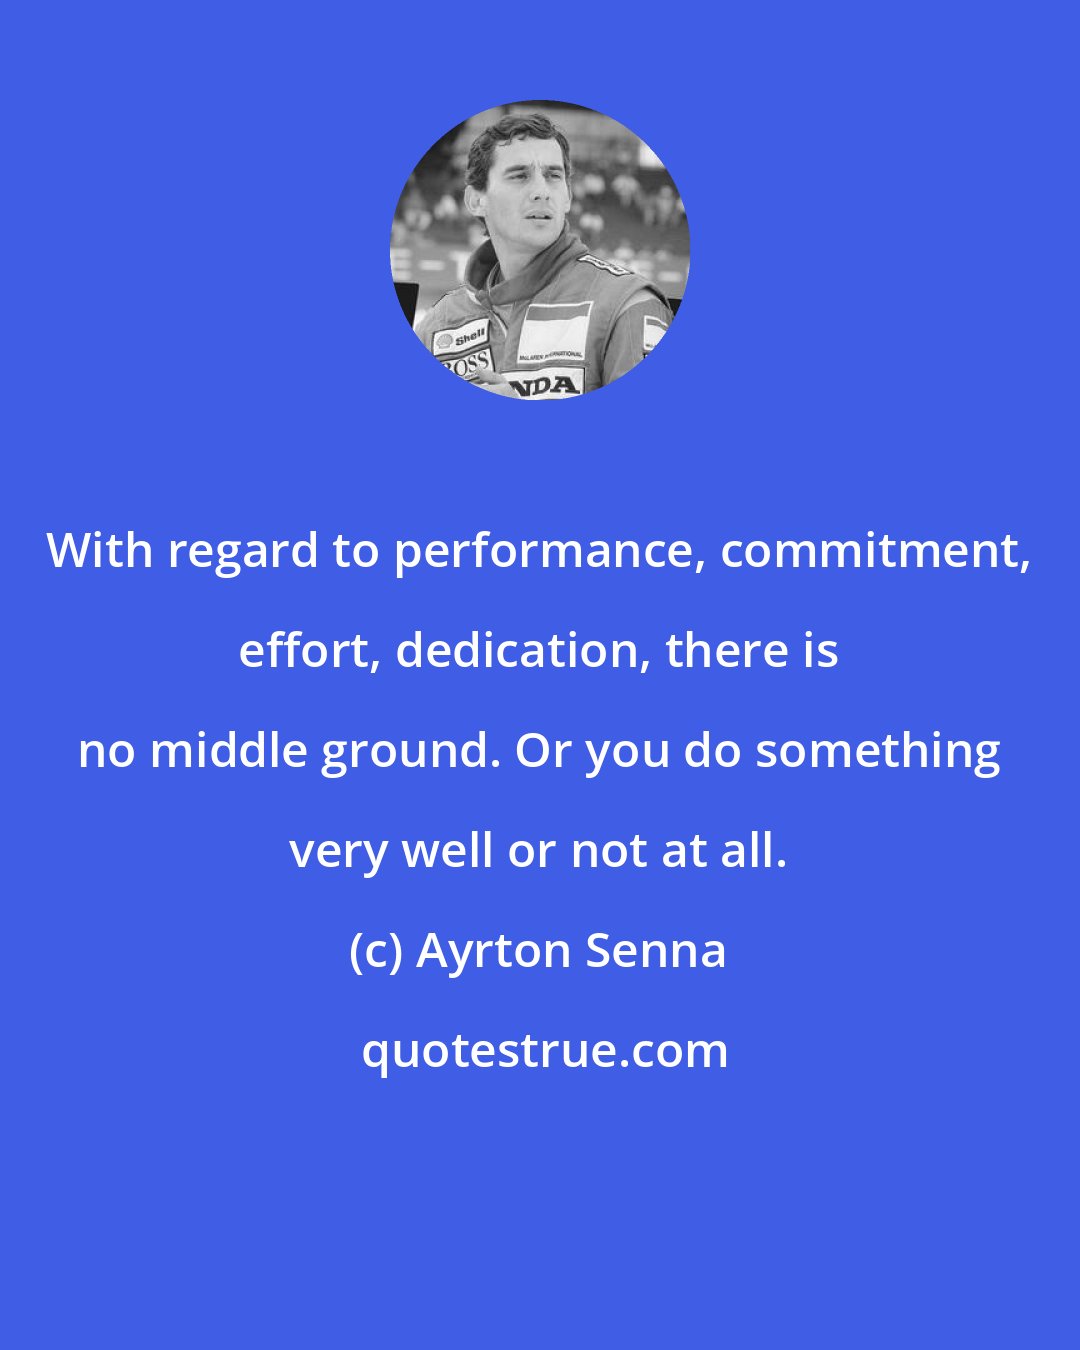 Ayrton Senna: With regard to performance, commitment, effort, dedication, there is no middle ground. Or you do something very well or not at all.